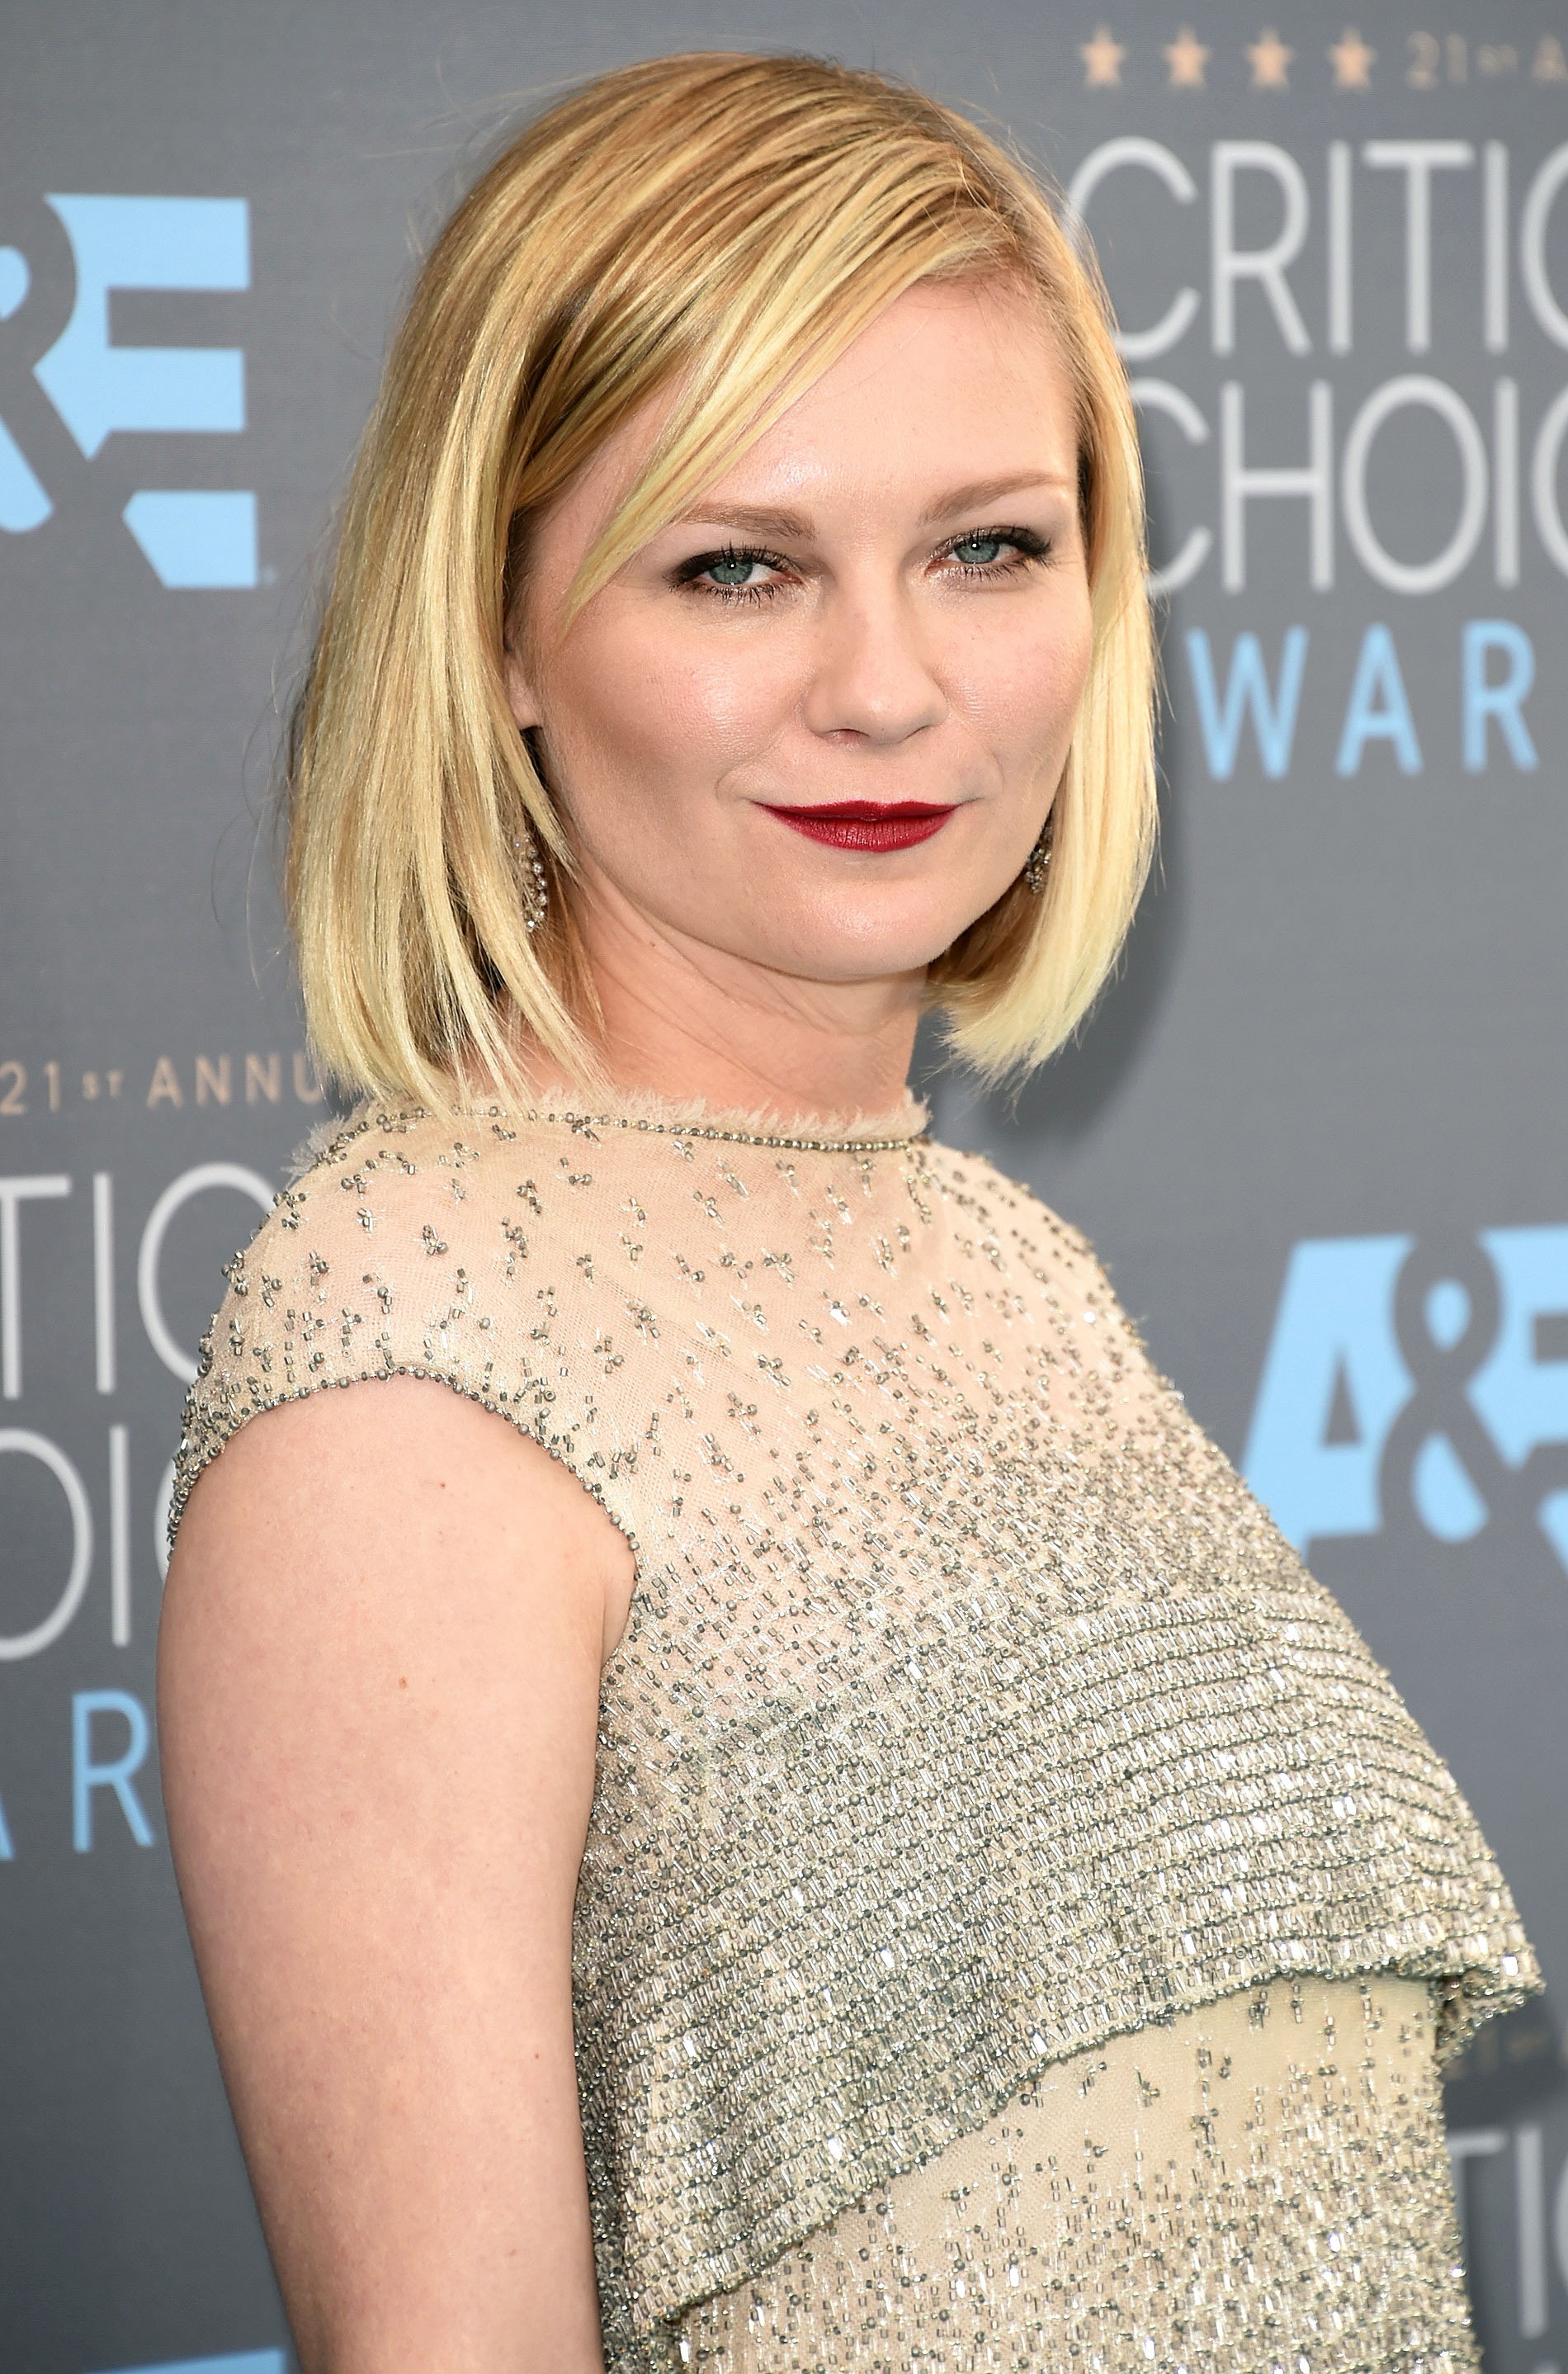 Kirsten Dunst Went Out This Weekend With the Cutest Two-Second Hair Idea |  Glamour